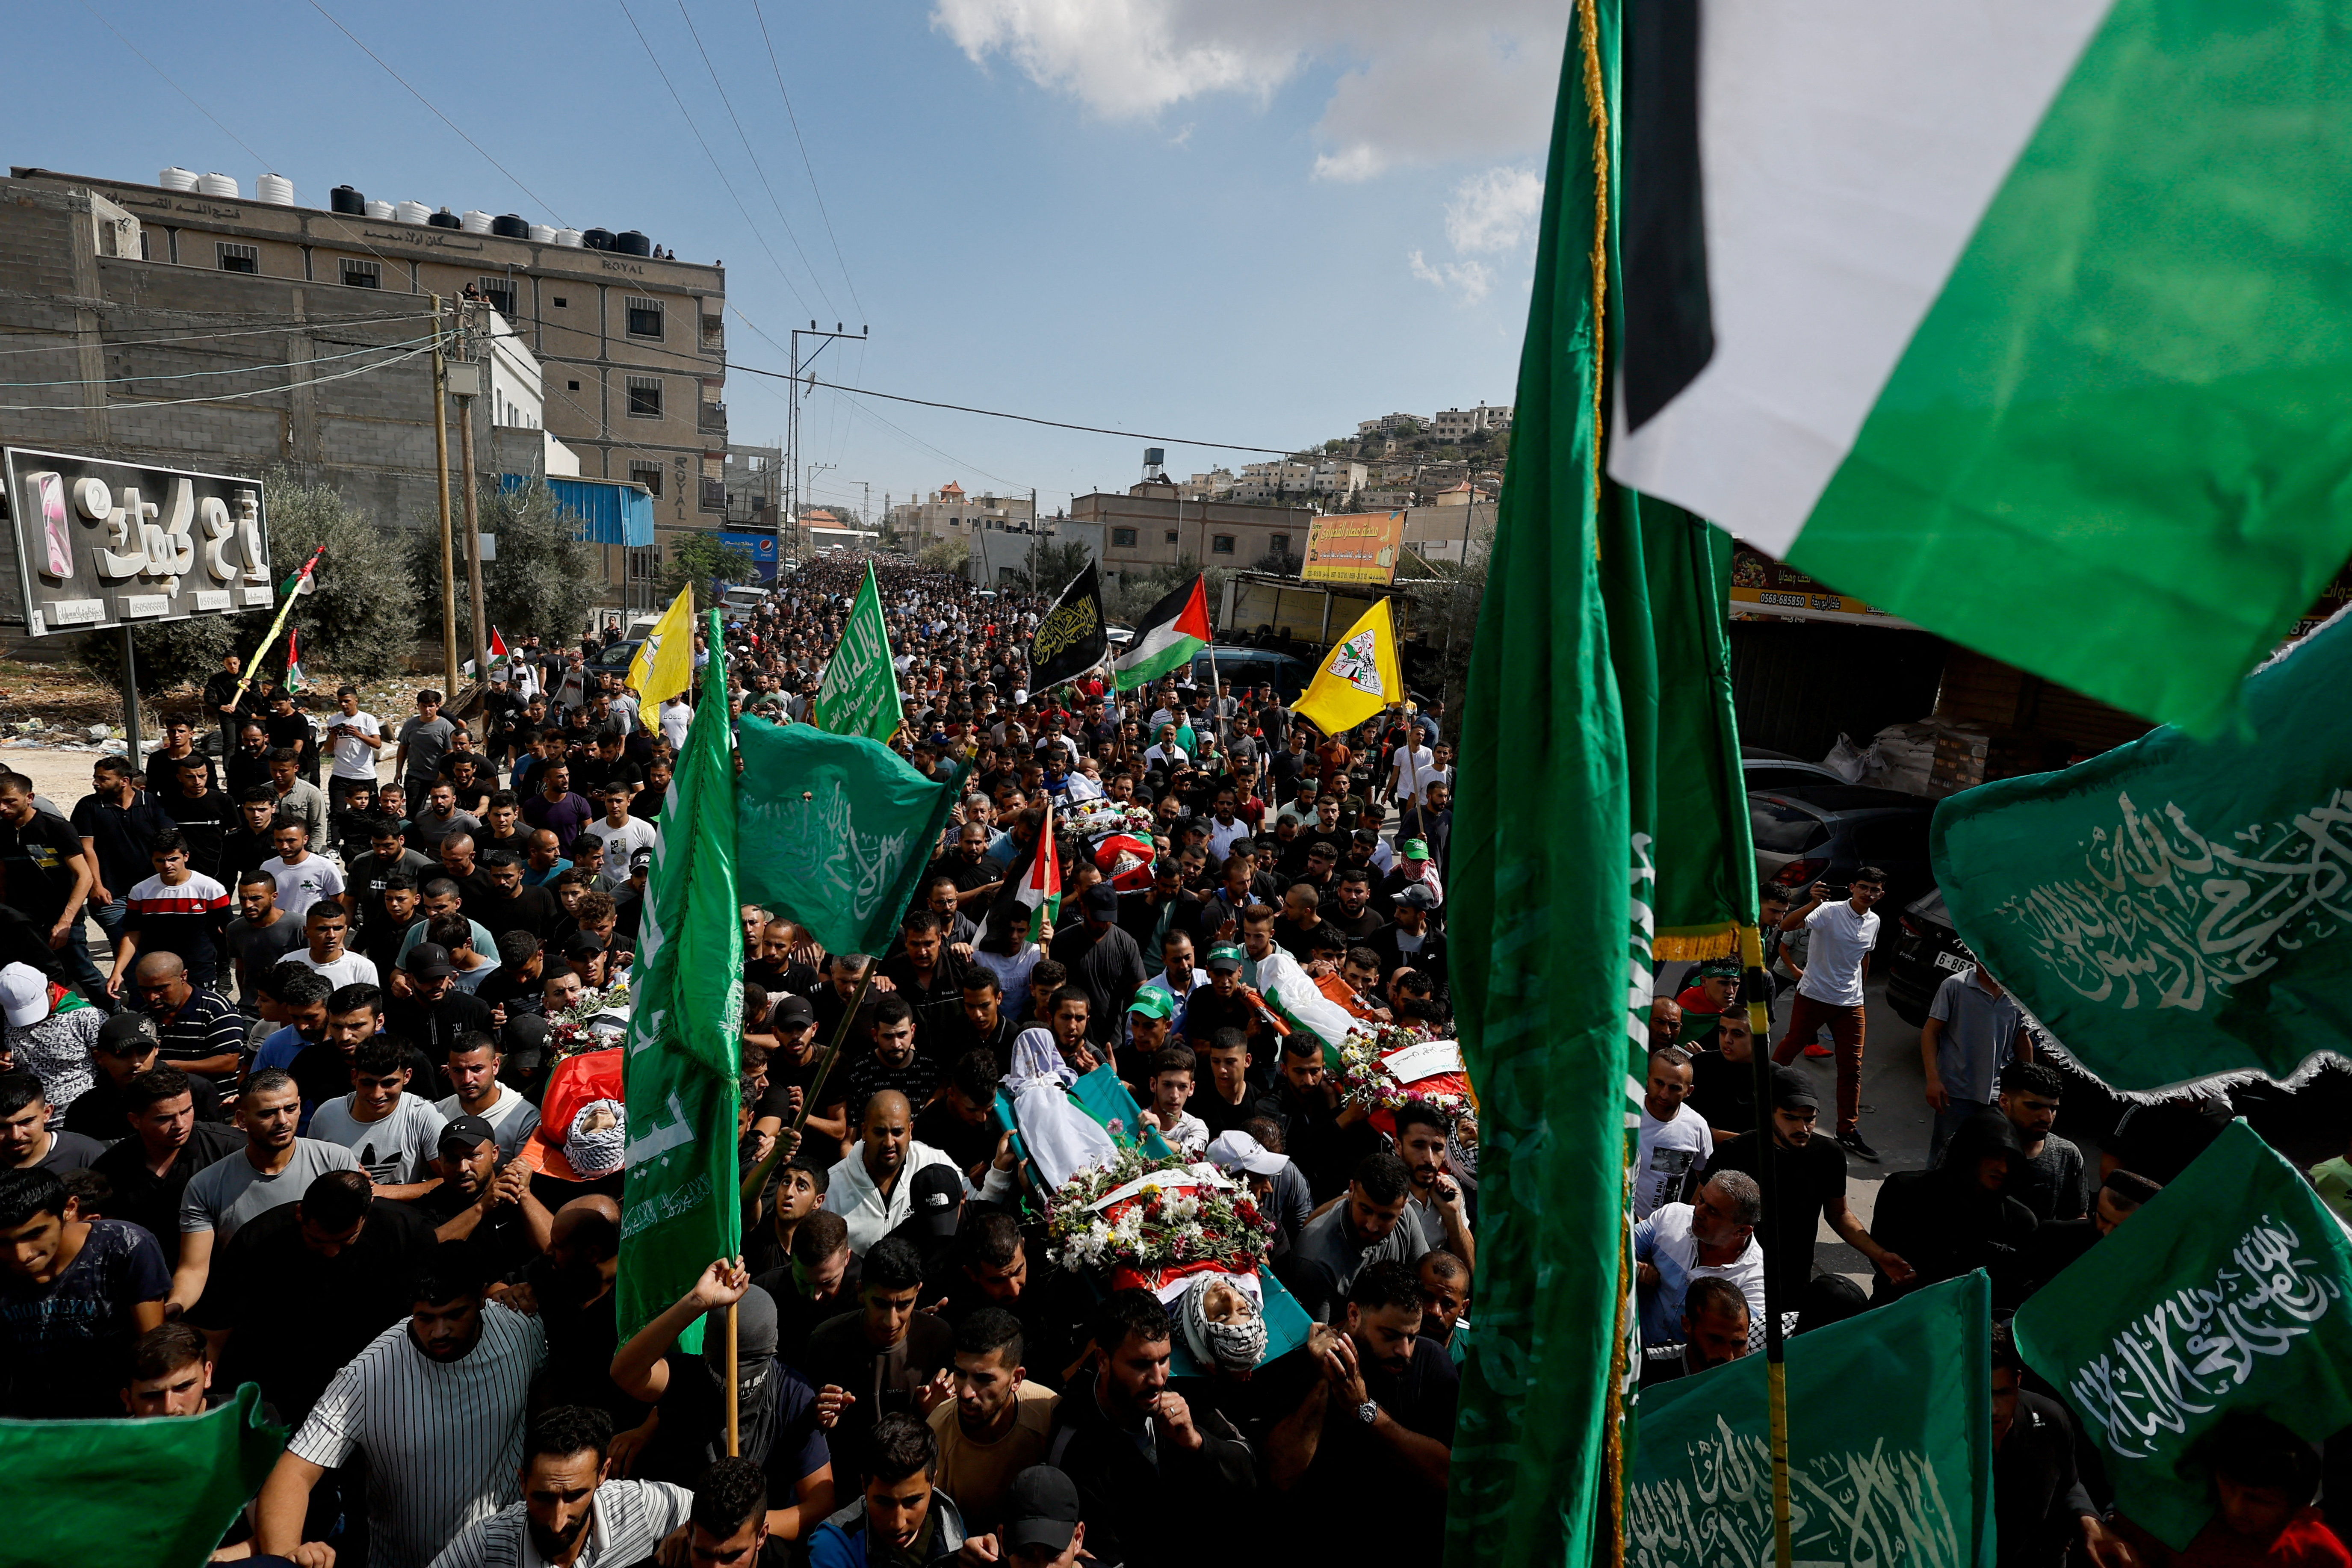 Funeral of a Palestinians killed in clashes with Israeli settlers near Nablus